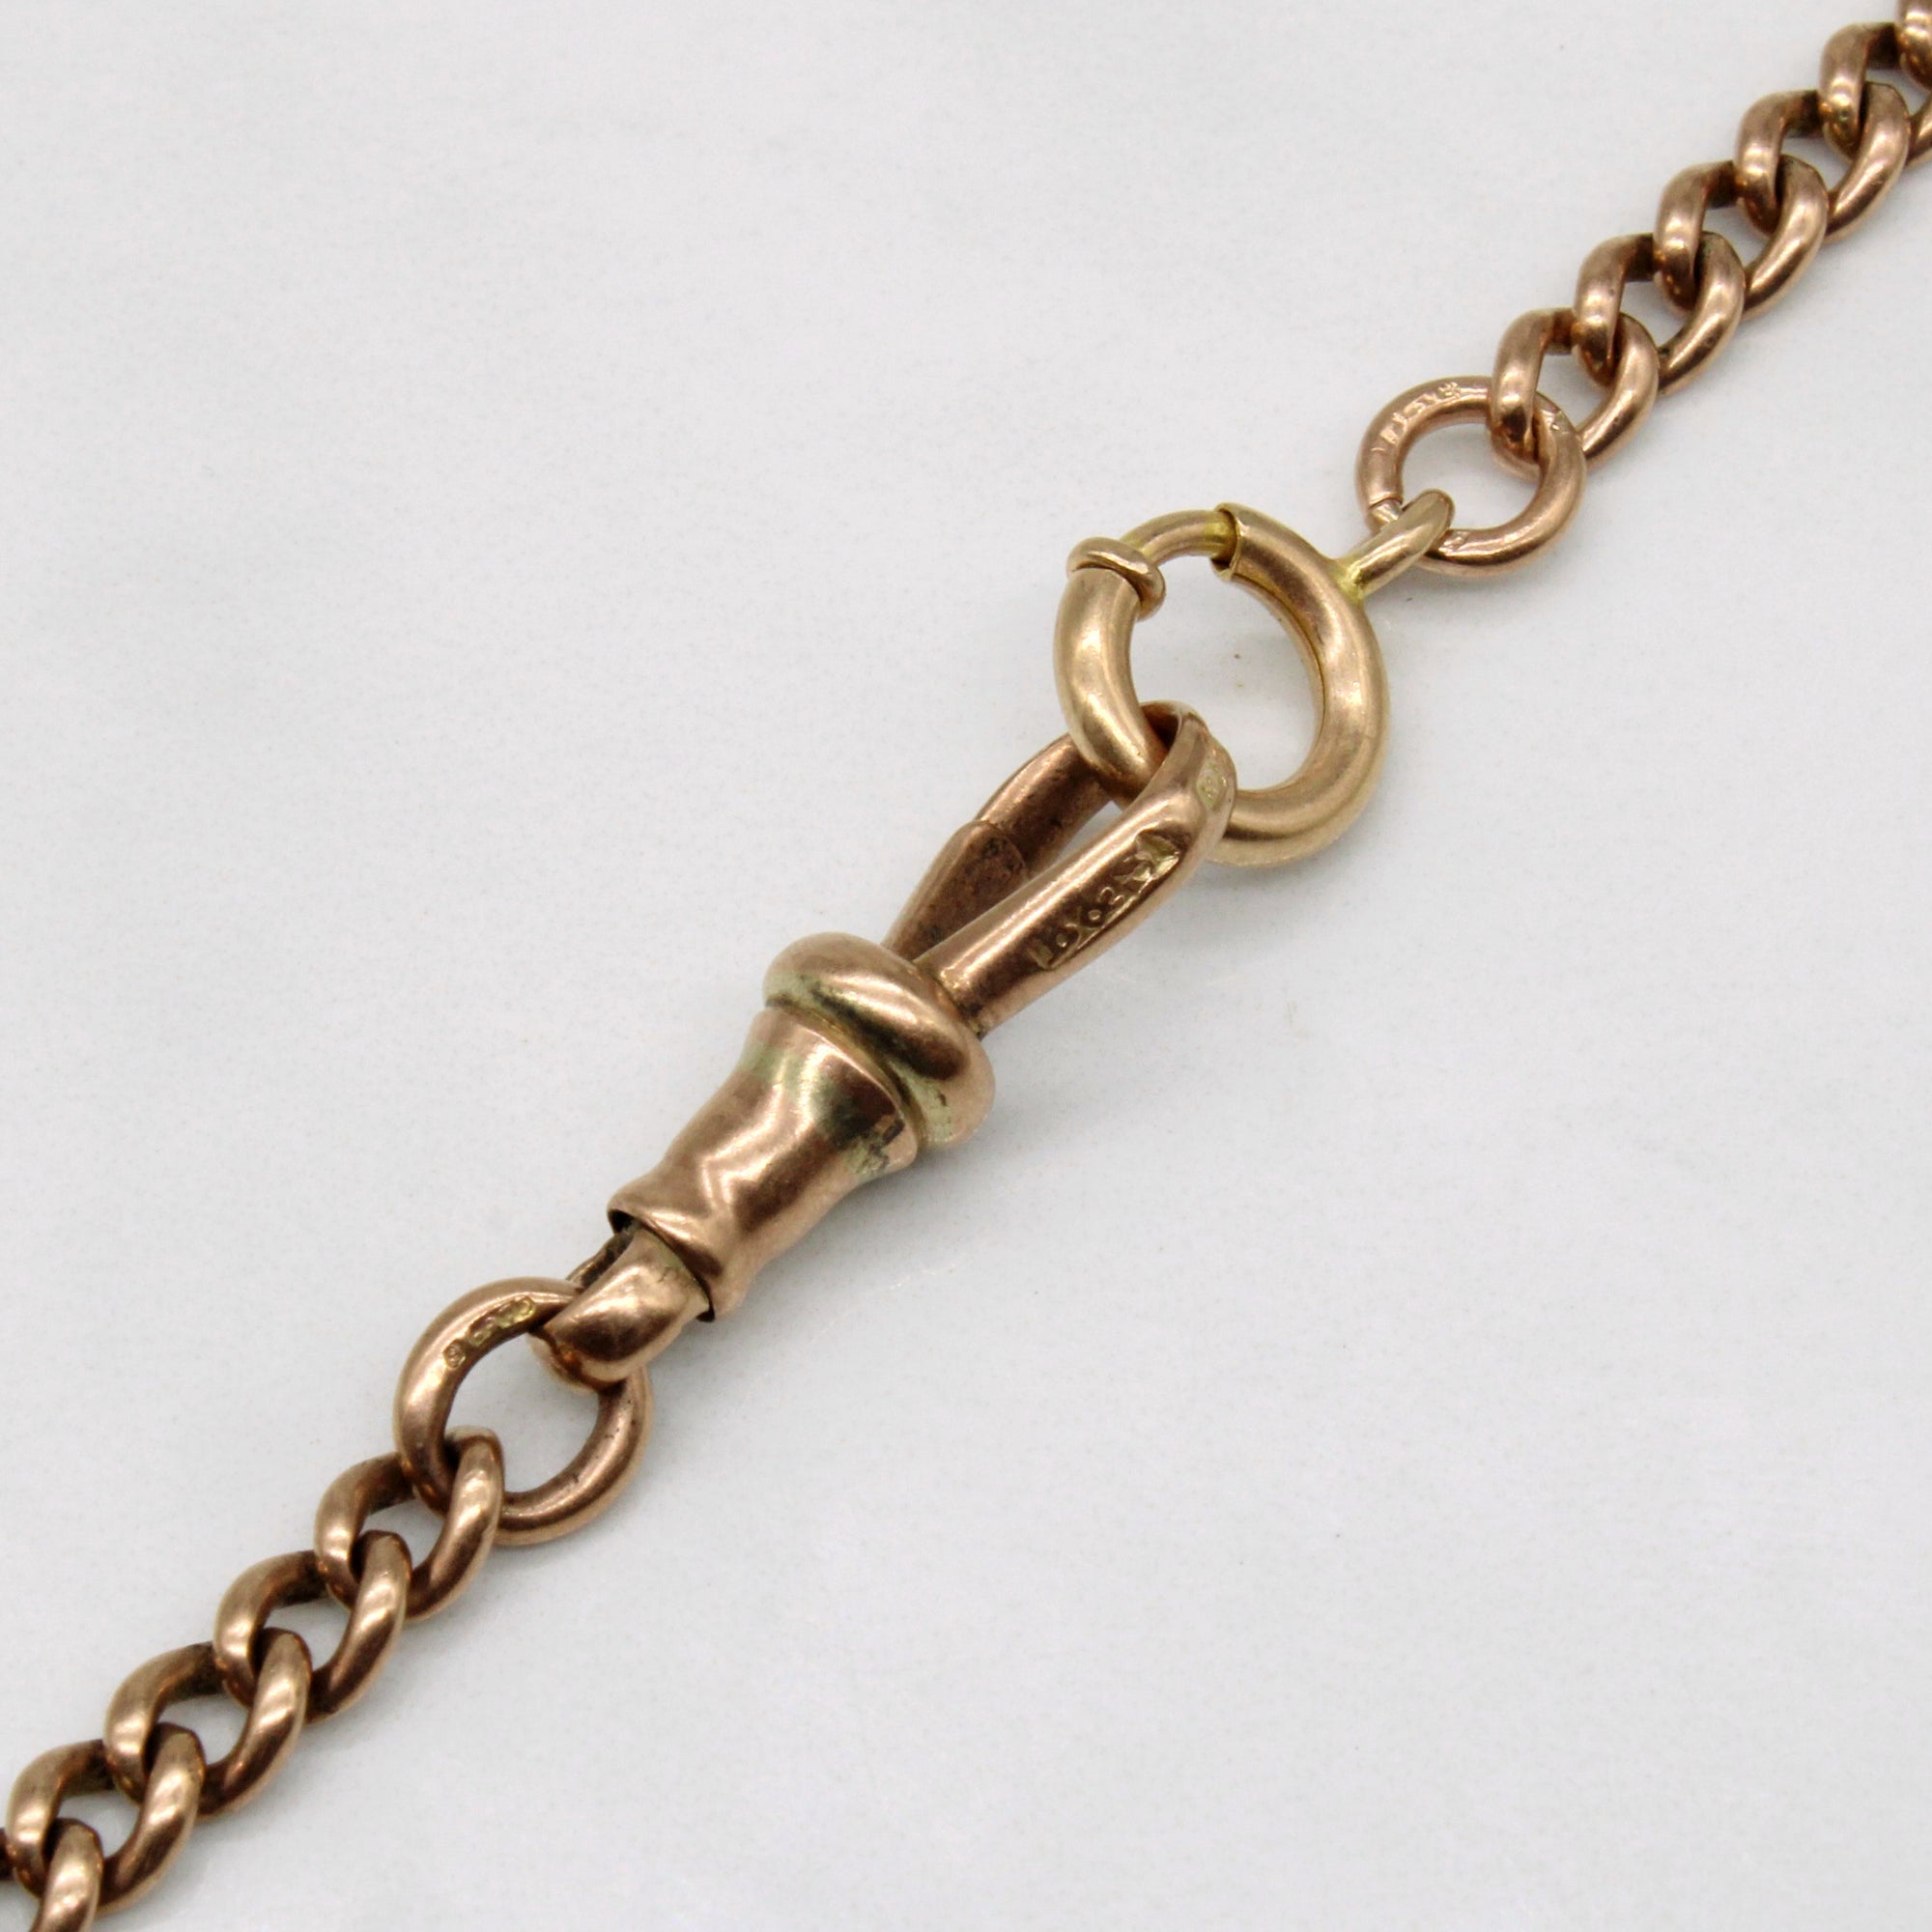 9k Rose Gold Watch Chain with Dog Clip Clasp | 13.5